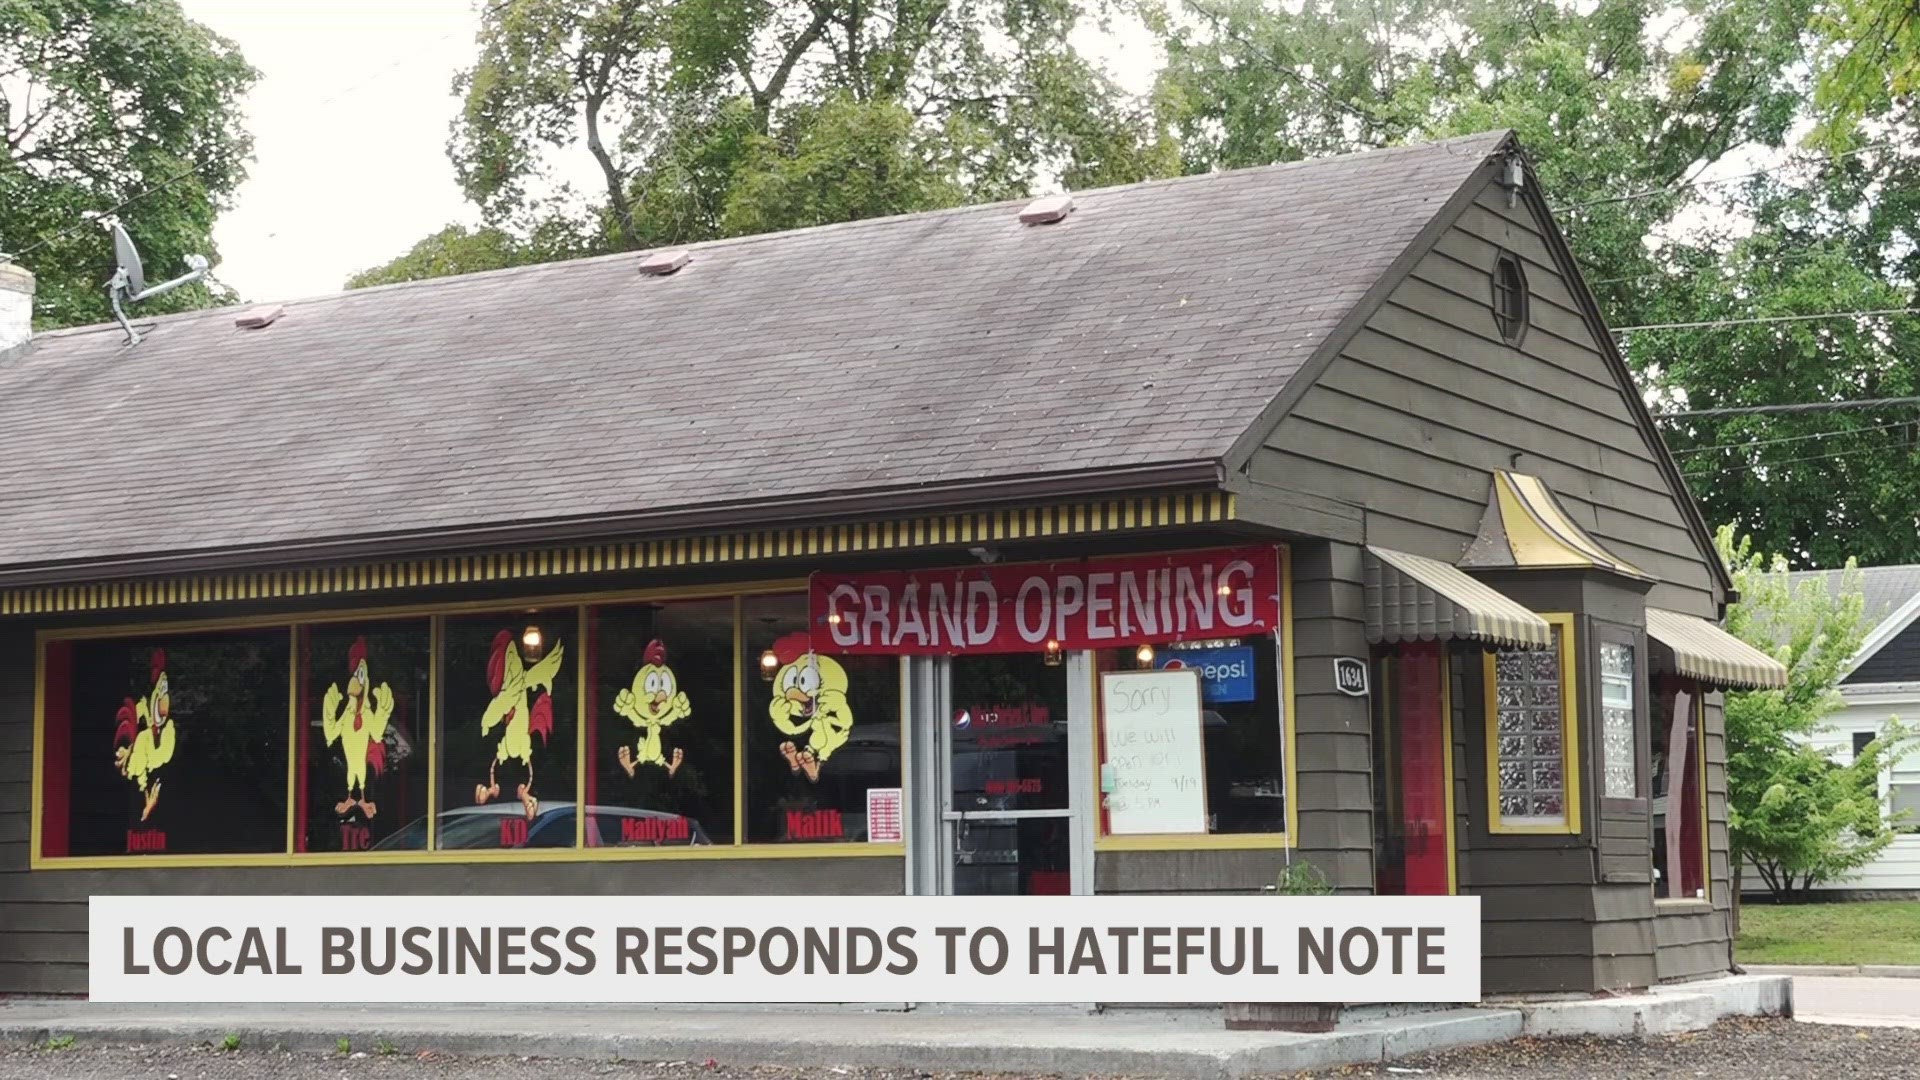 Rika's Chicken has just moved to Northeast Grand Rapids, but after celebrating their soft open, received a note telling them to fit in or be driven out.